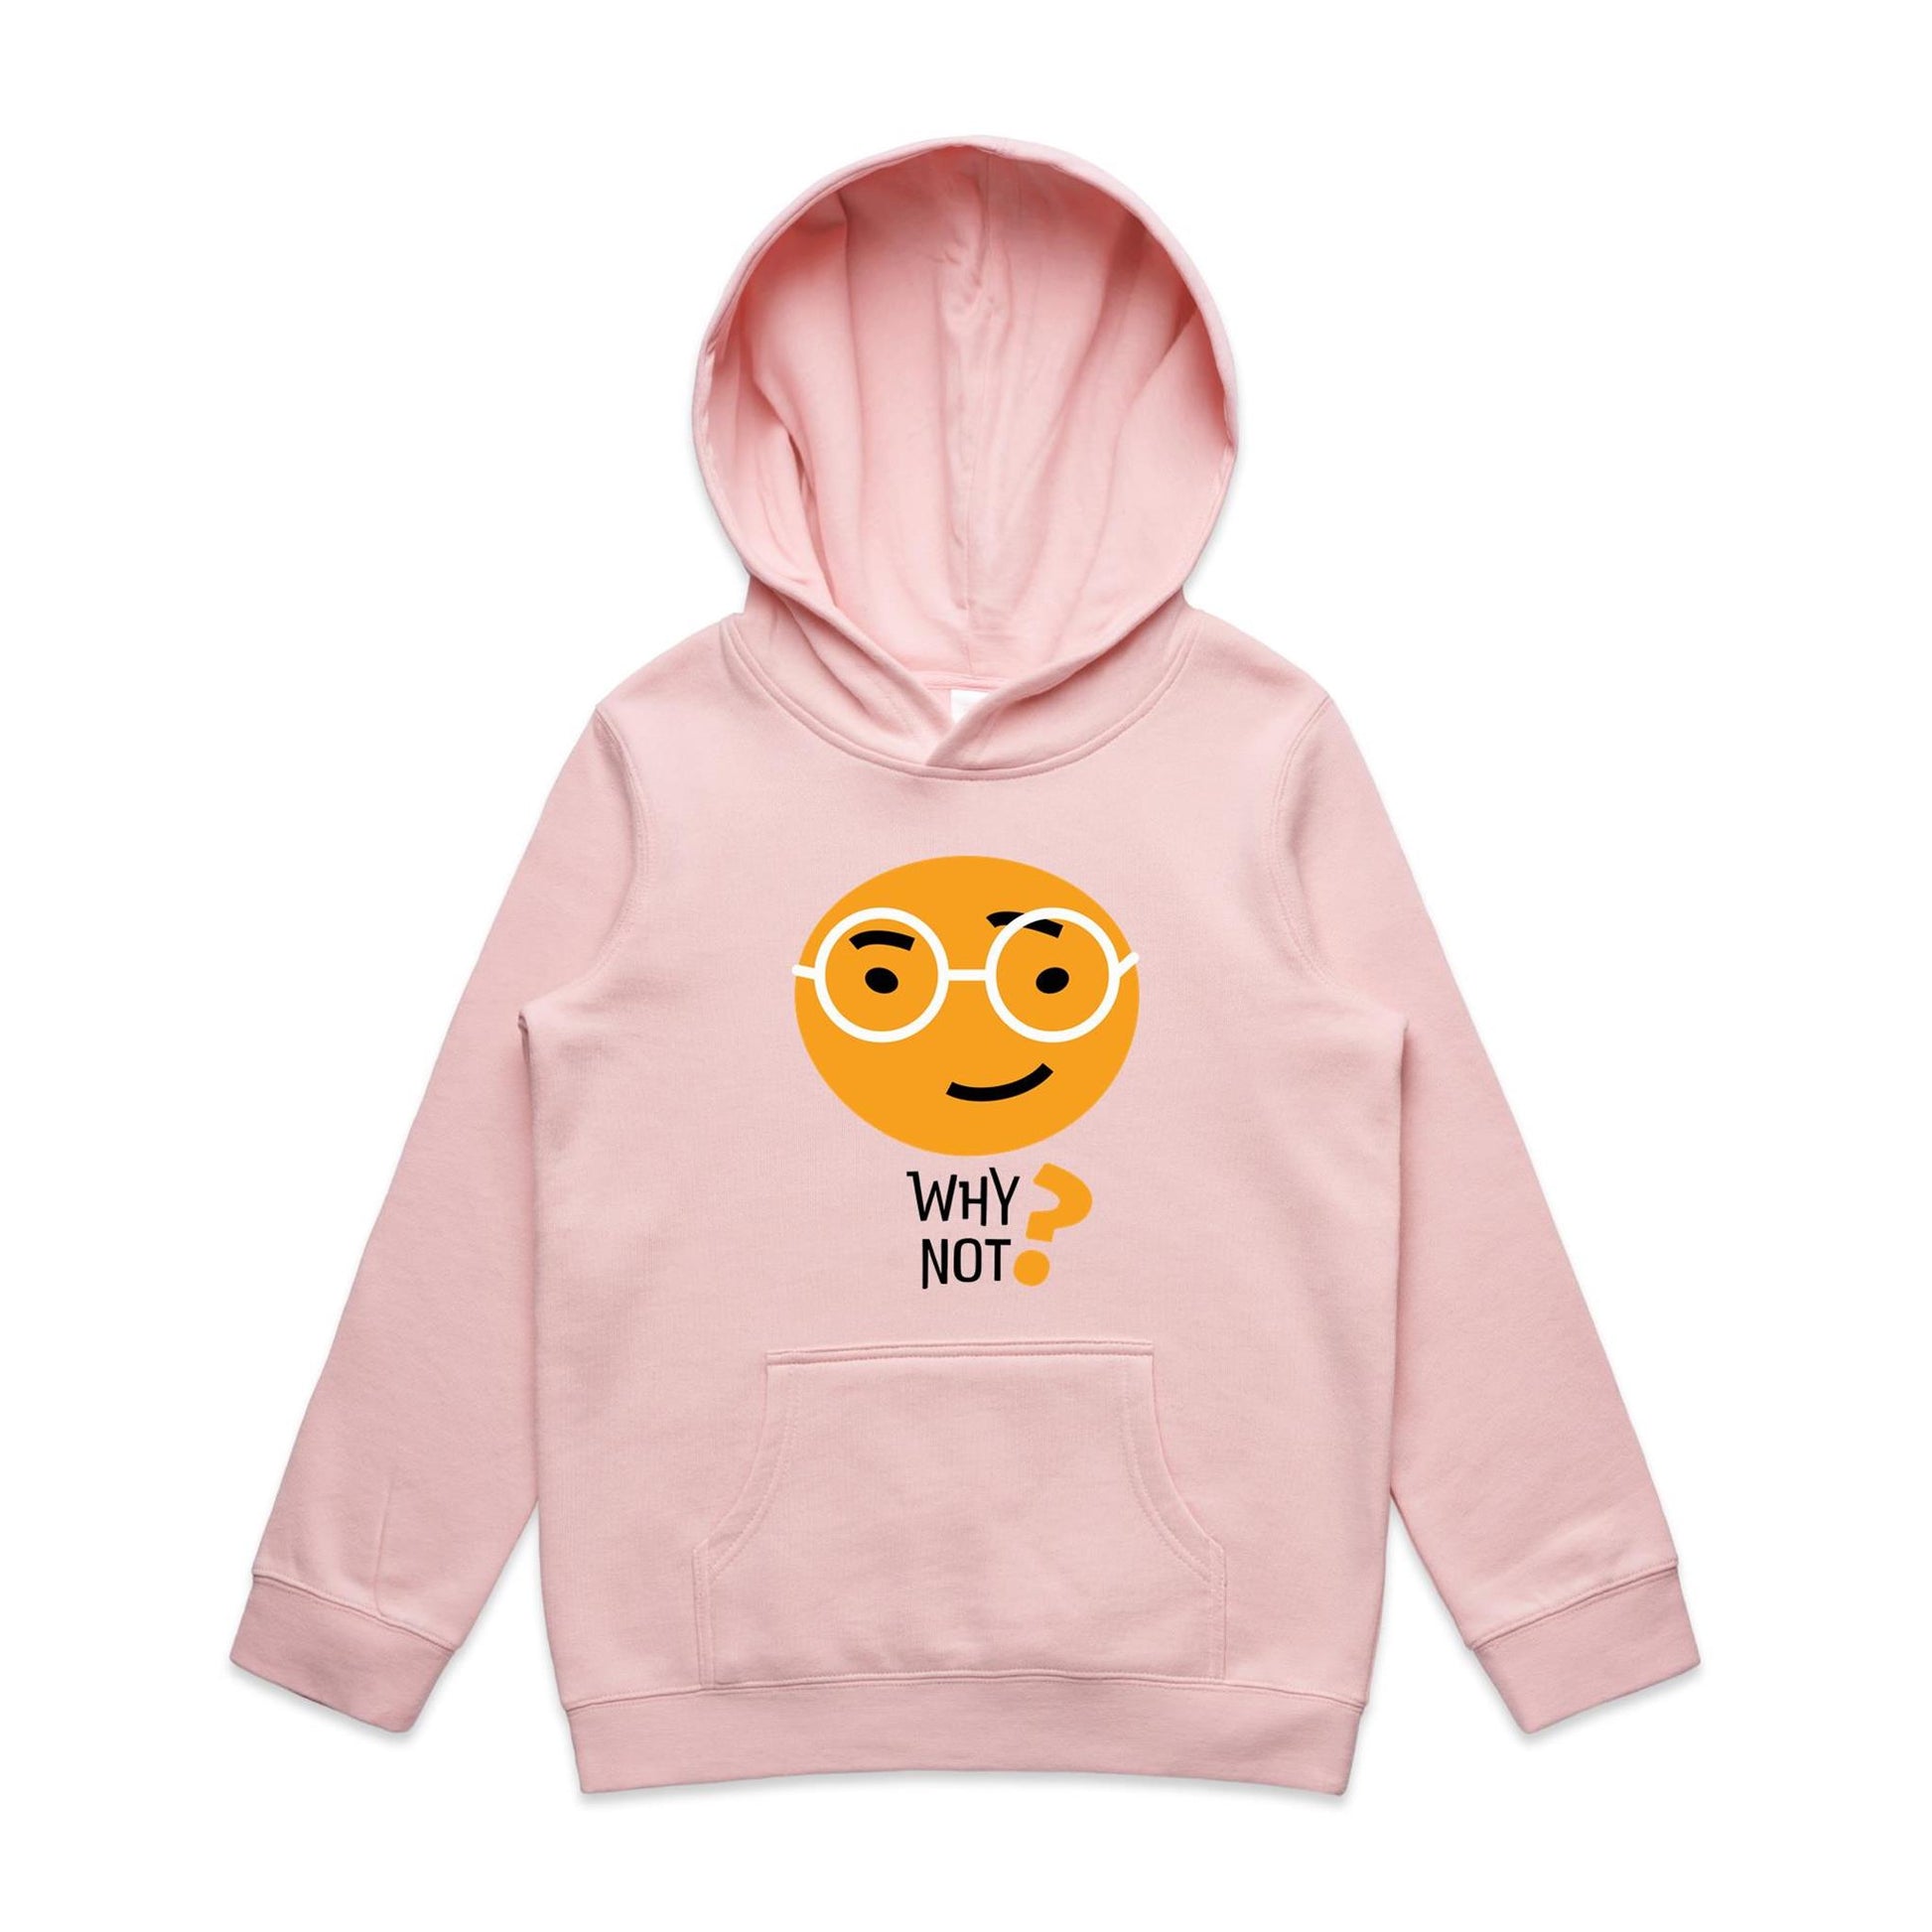 Why Not? - Youth Supply Hood Pink Kids Hoodie